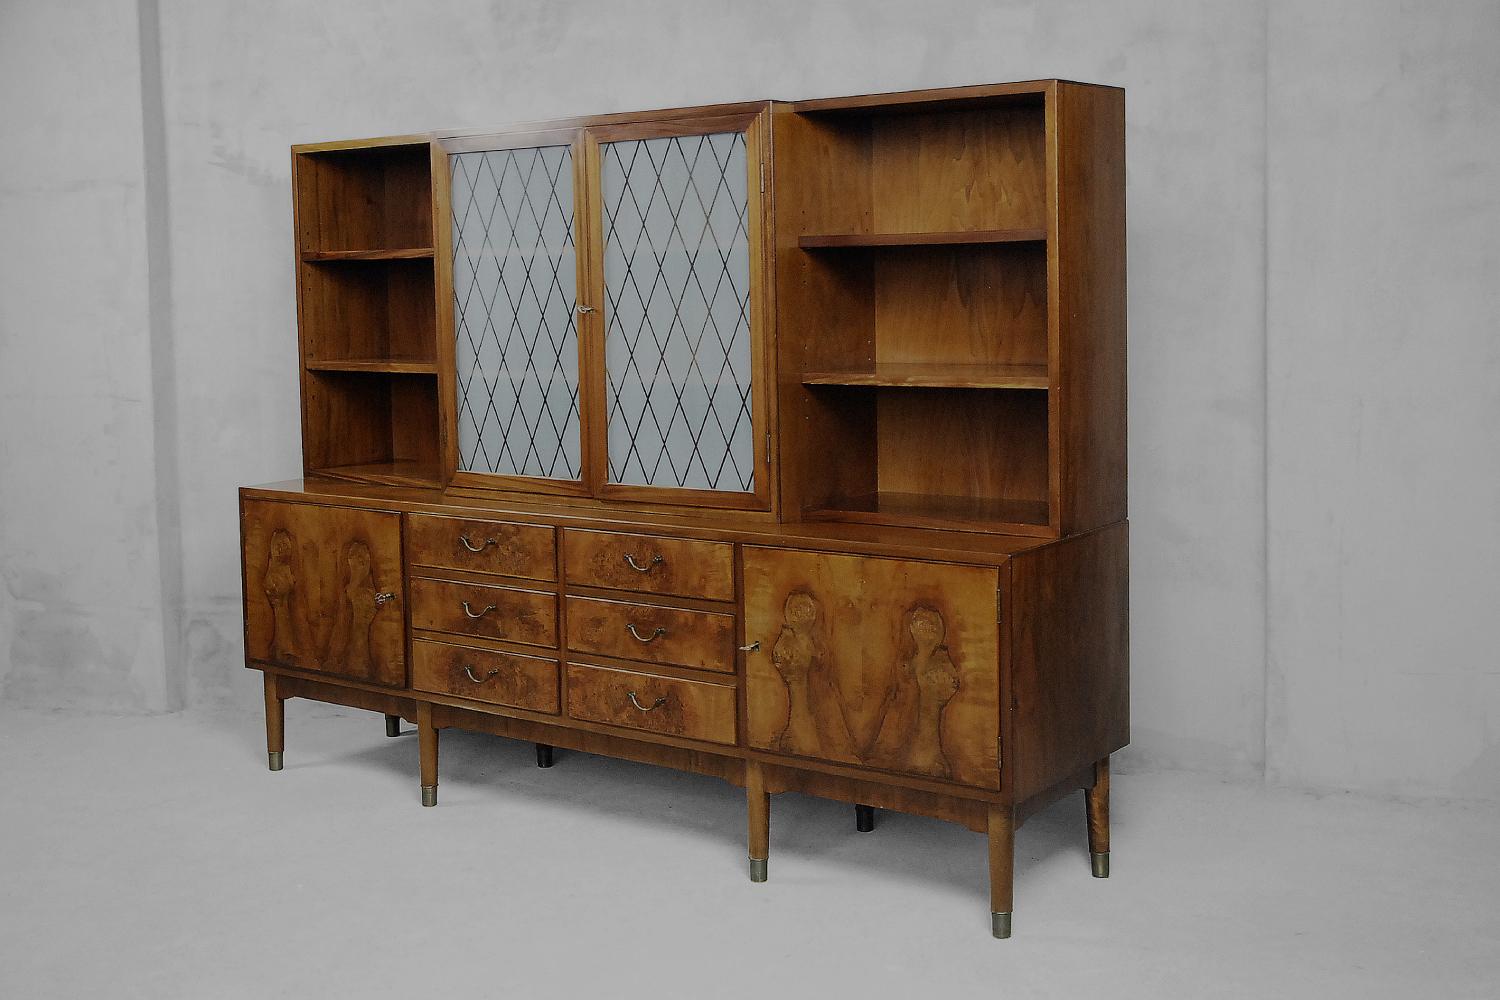 Vintage Swedish Walnut and Burl Buffet with Glass Vitrine, 1940s For Sale 5